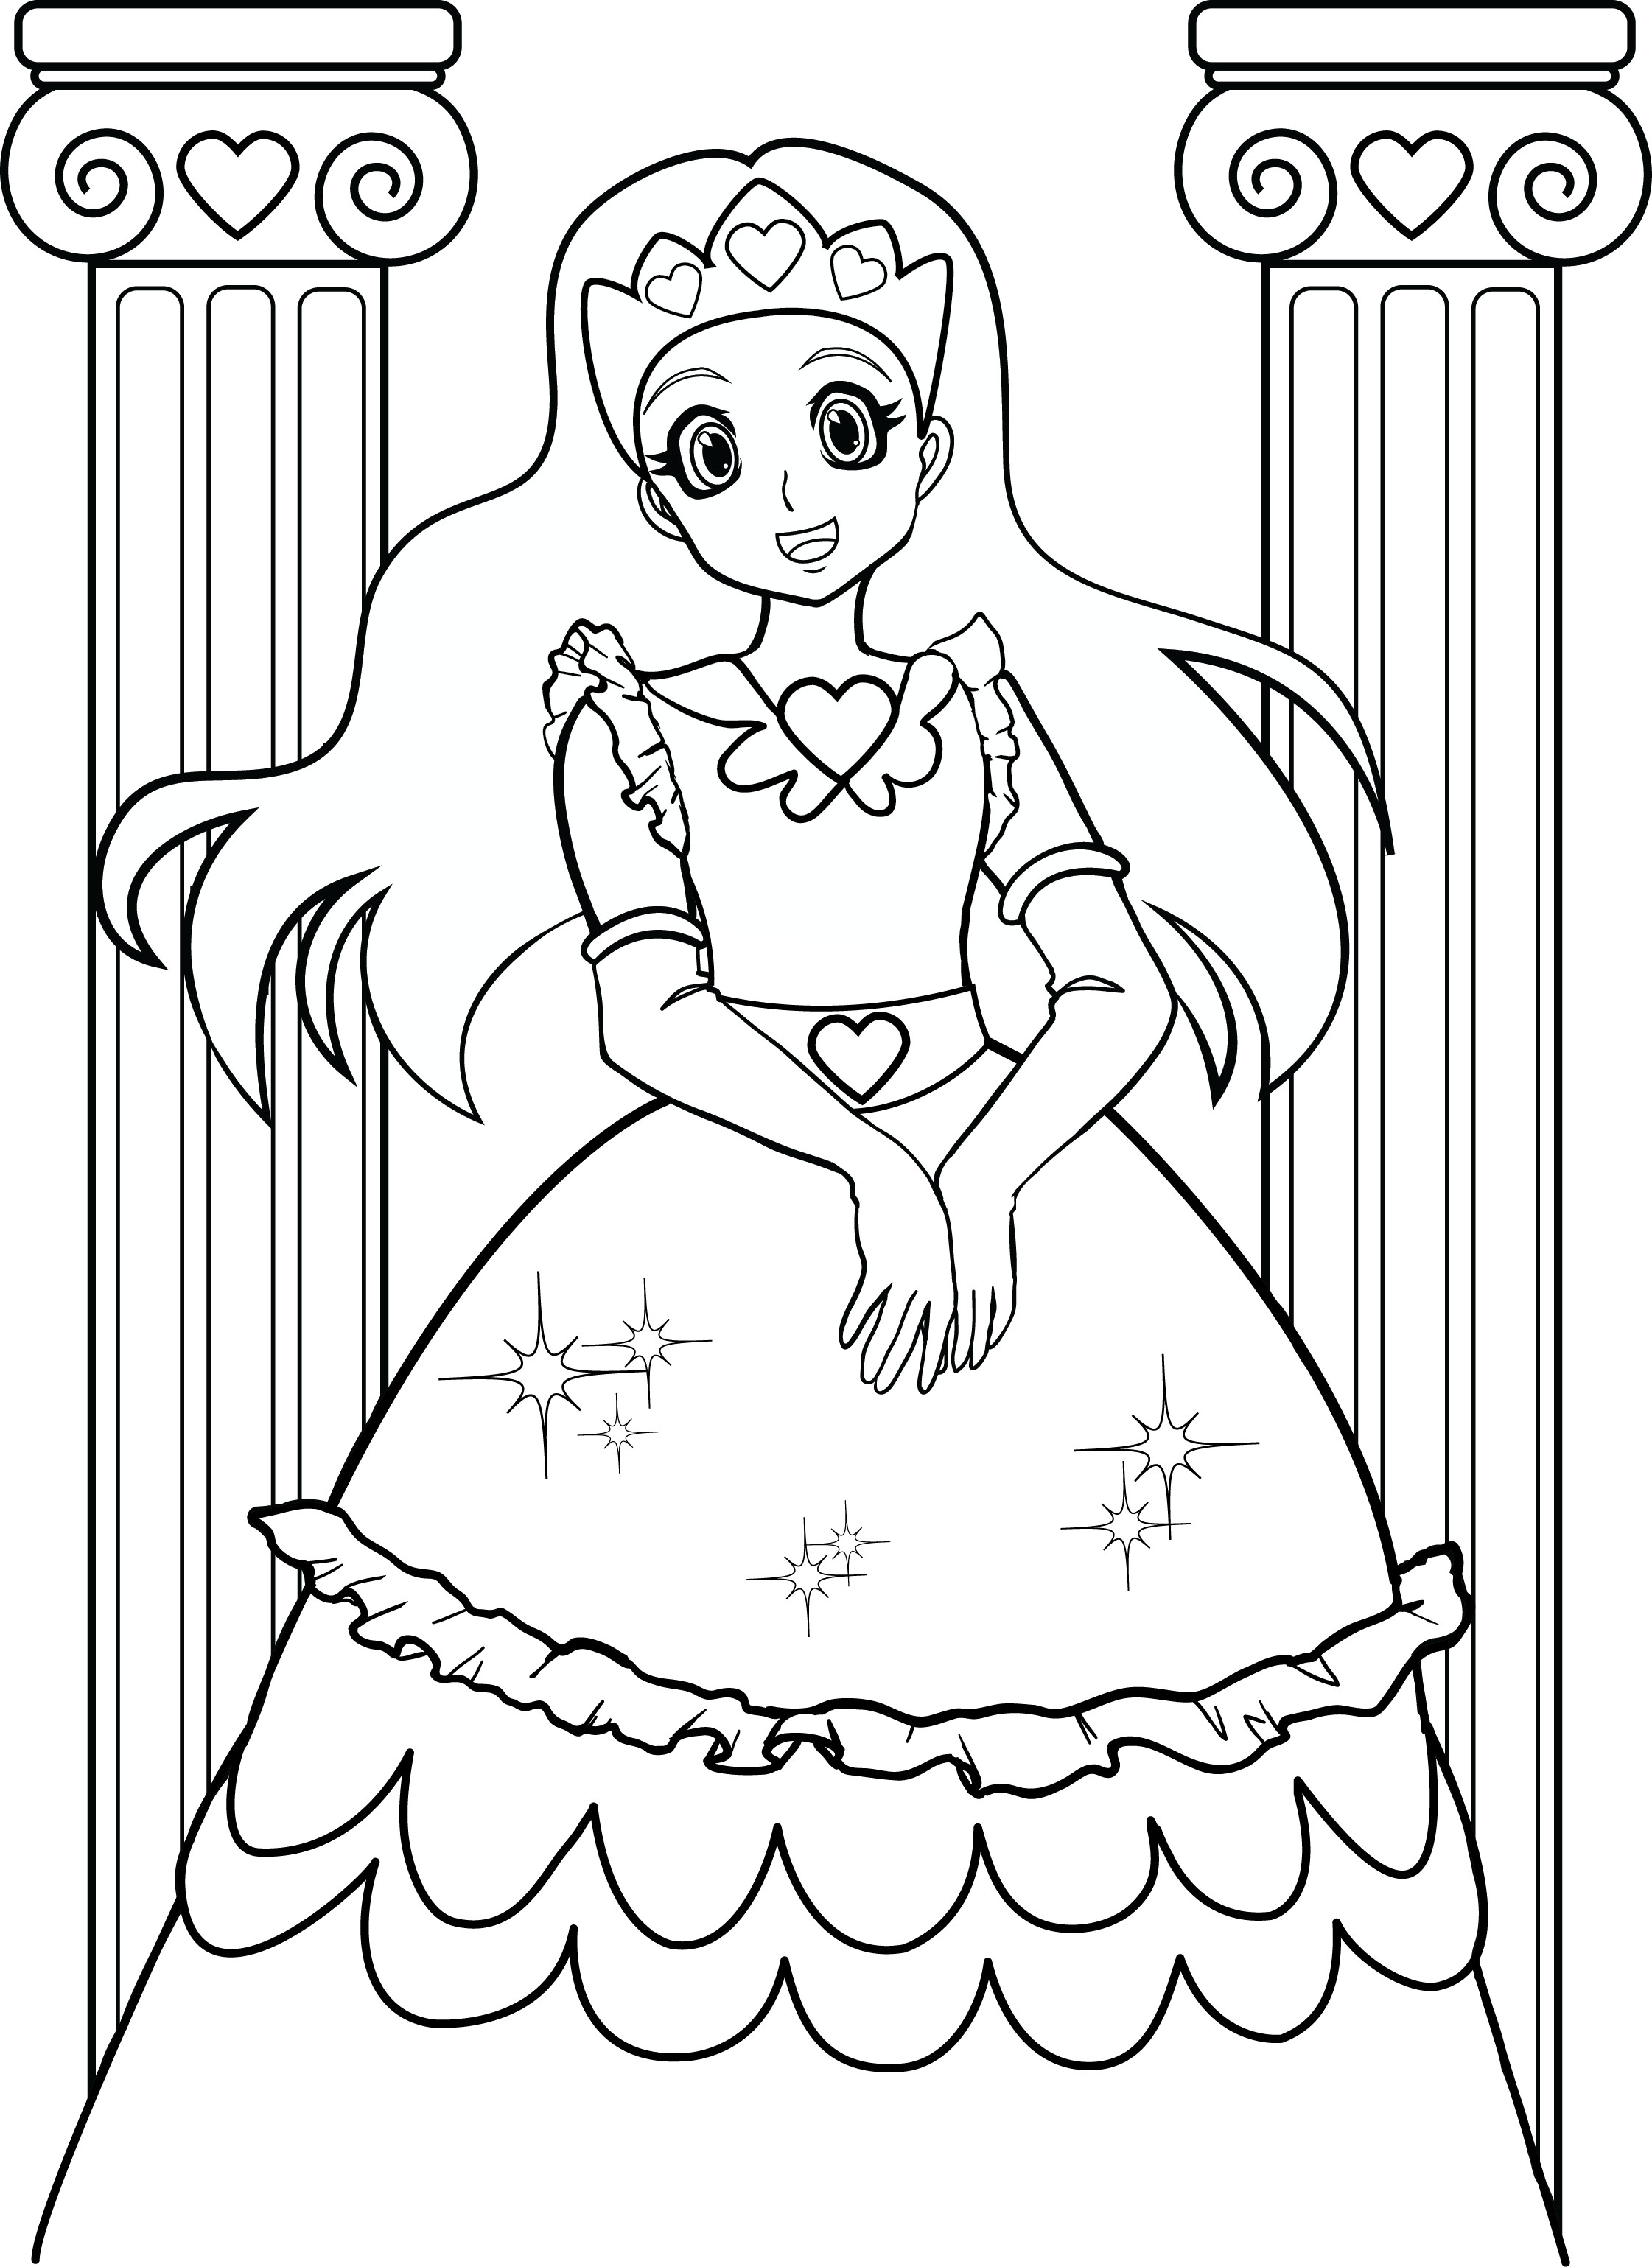 Online Coloring Sheets For Girls
 Coloring Pages For Girls 7